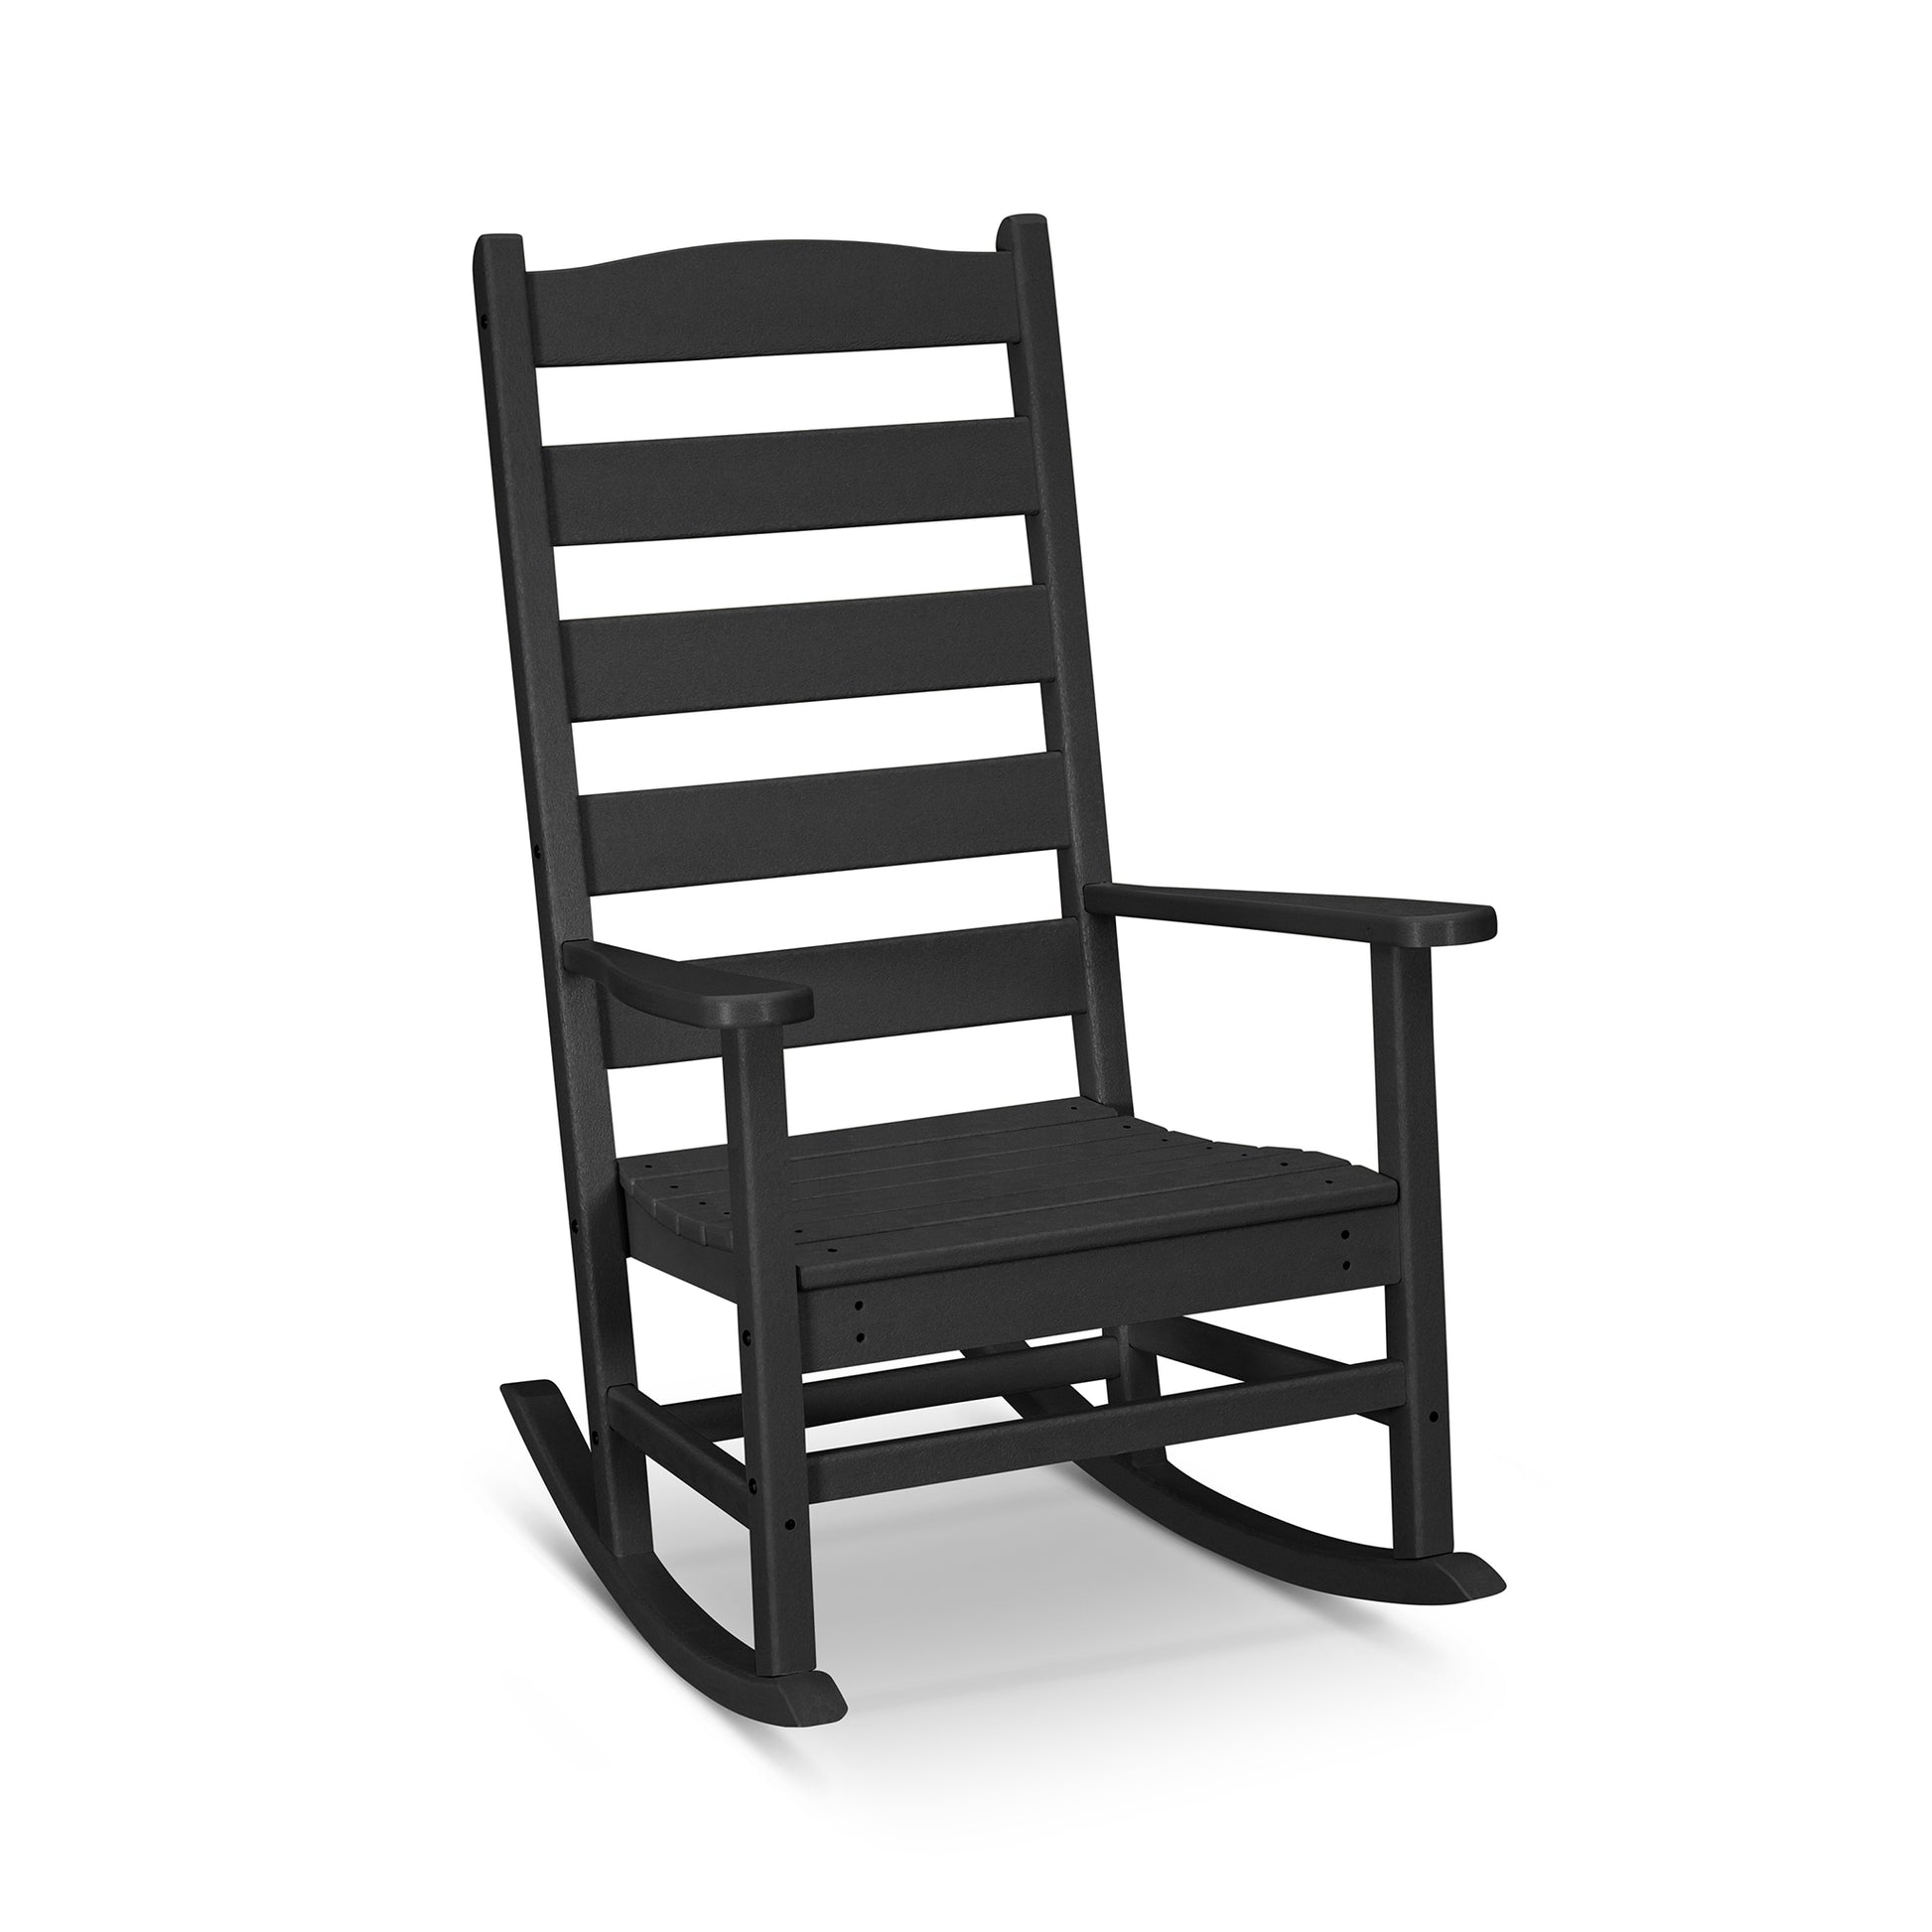 A black, traditional-style POLYWOOD Shaker Porch Rocking Chair with horizontal slats on the backrest and a solid seat, set against a plain white background.